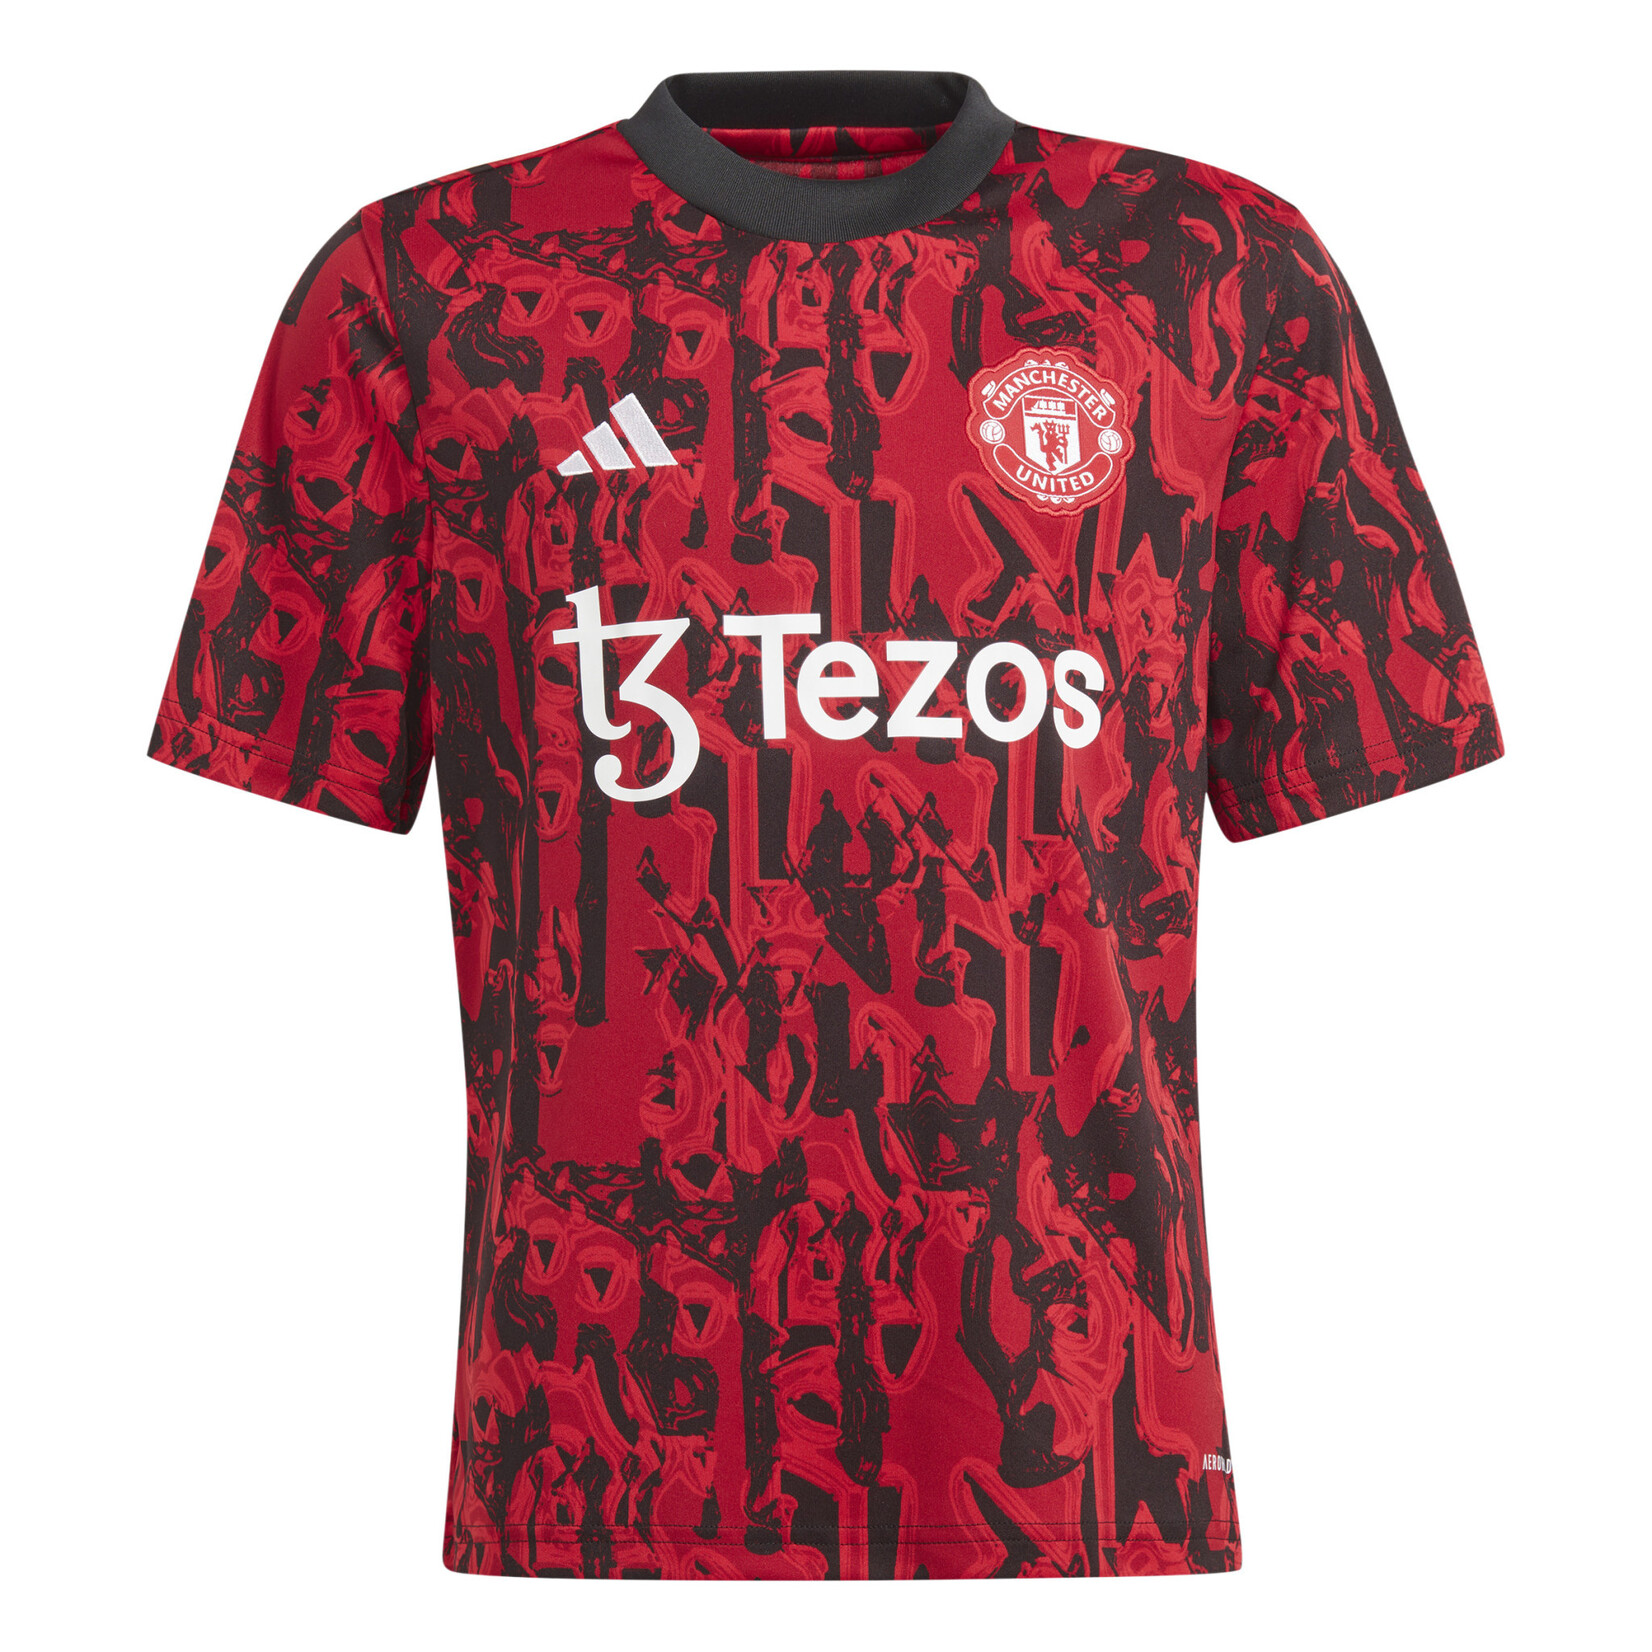 ADIDAS MANCHESTER UNITED 23/24 PREMATCH JERSEY YOUTH (RED/BLACK)